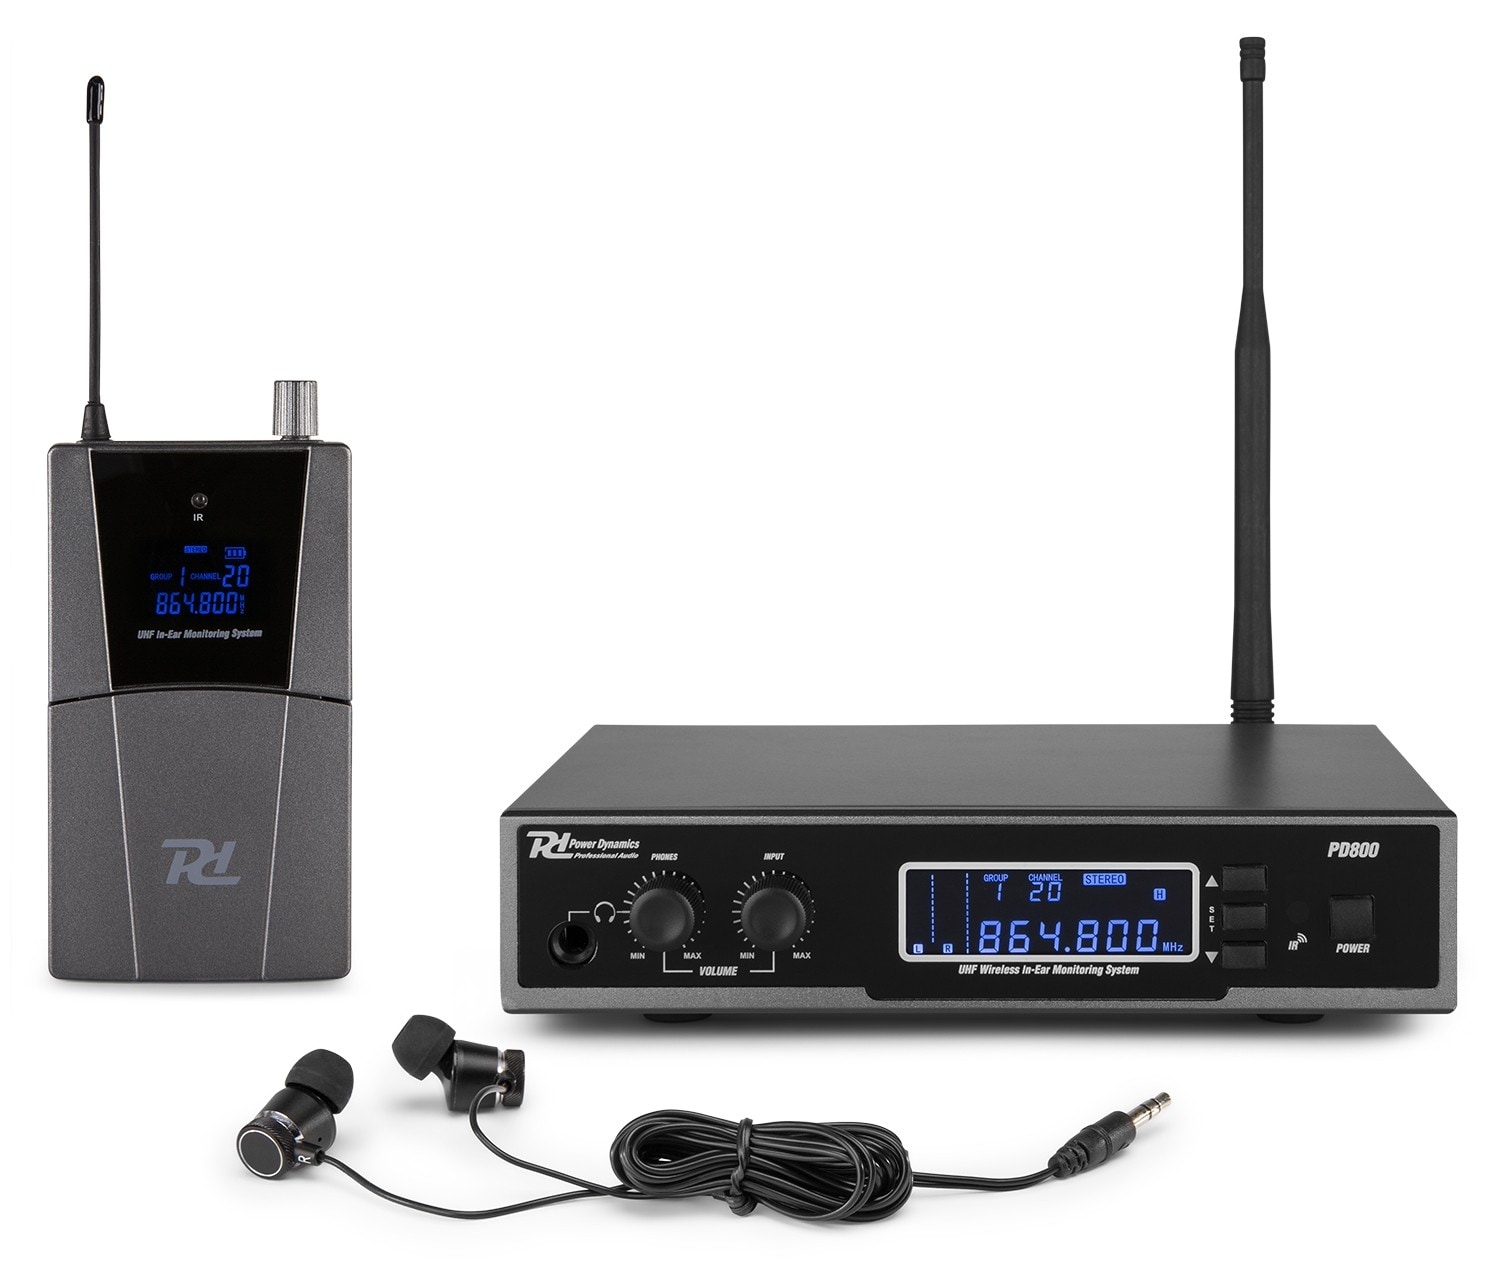 Power Dynamics PD800 InEar monitor system UHF